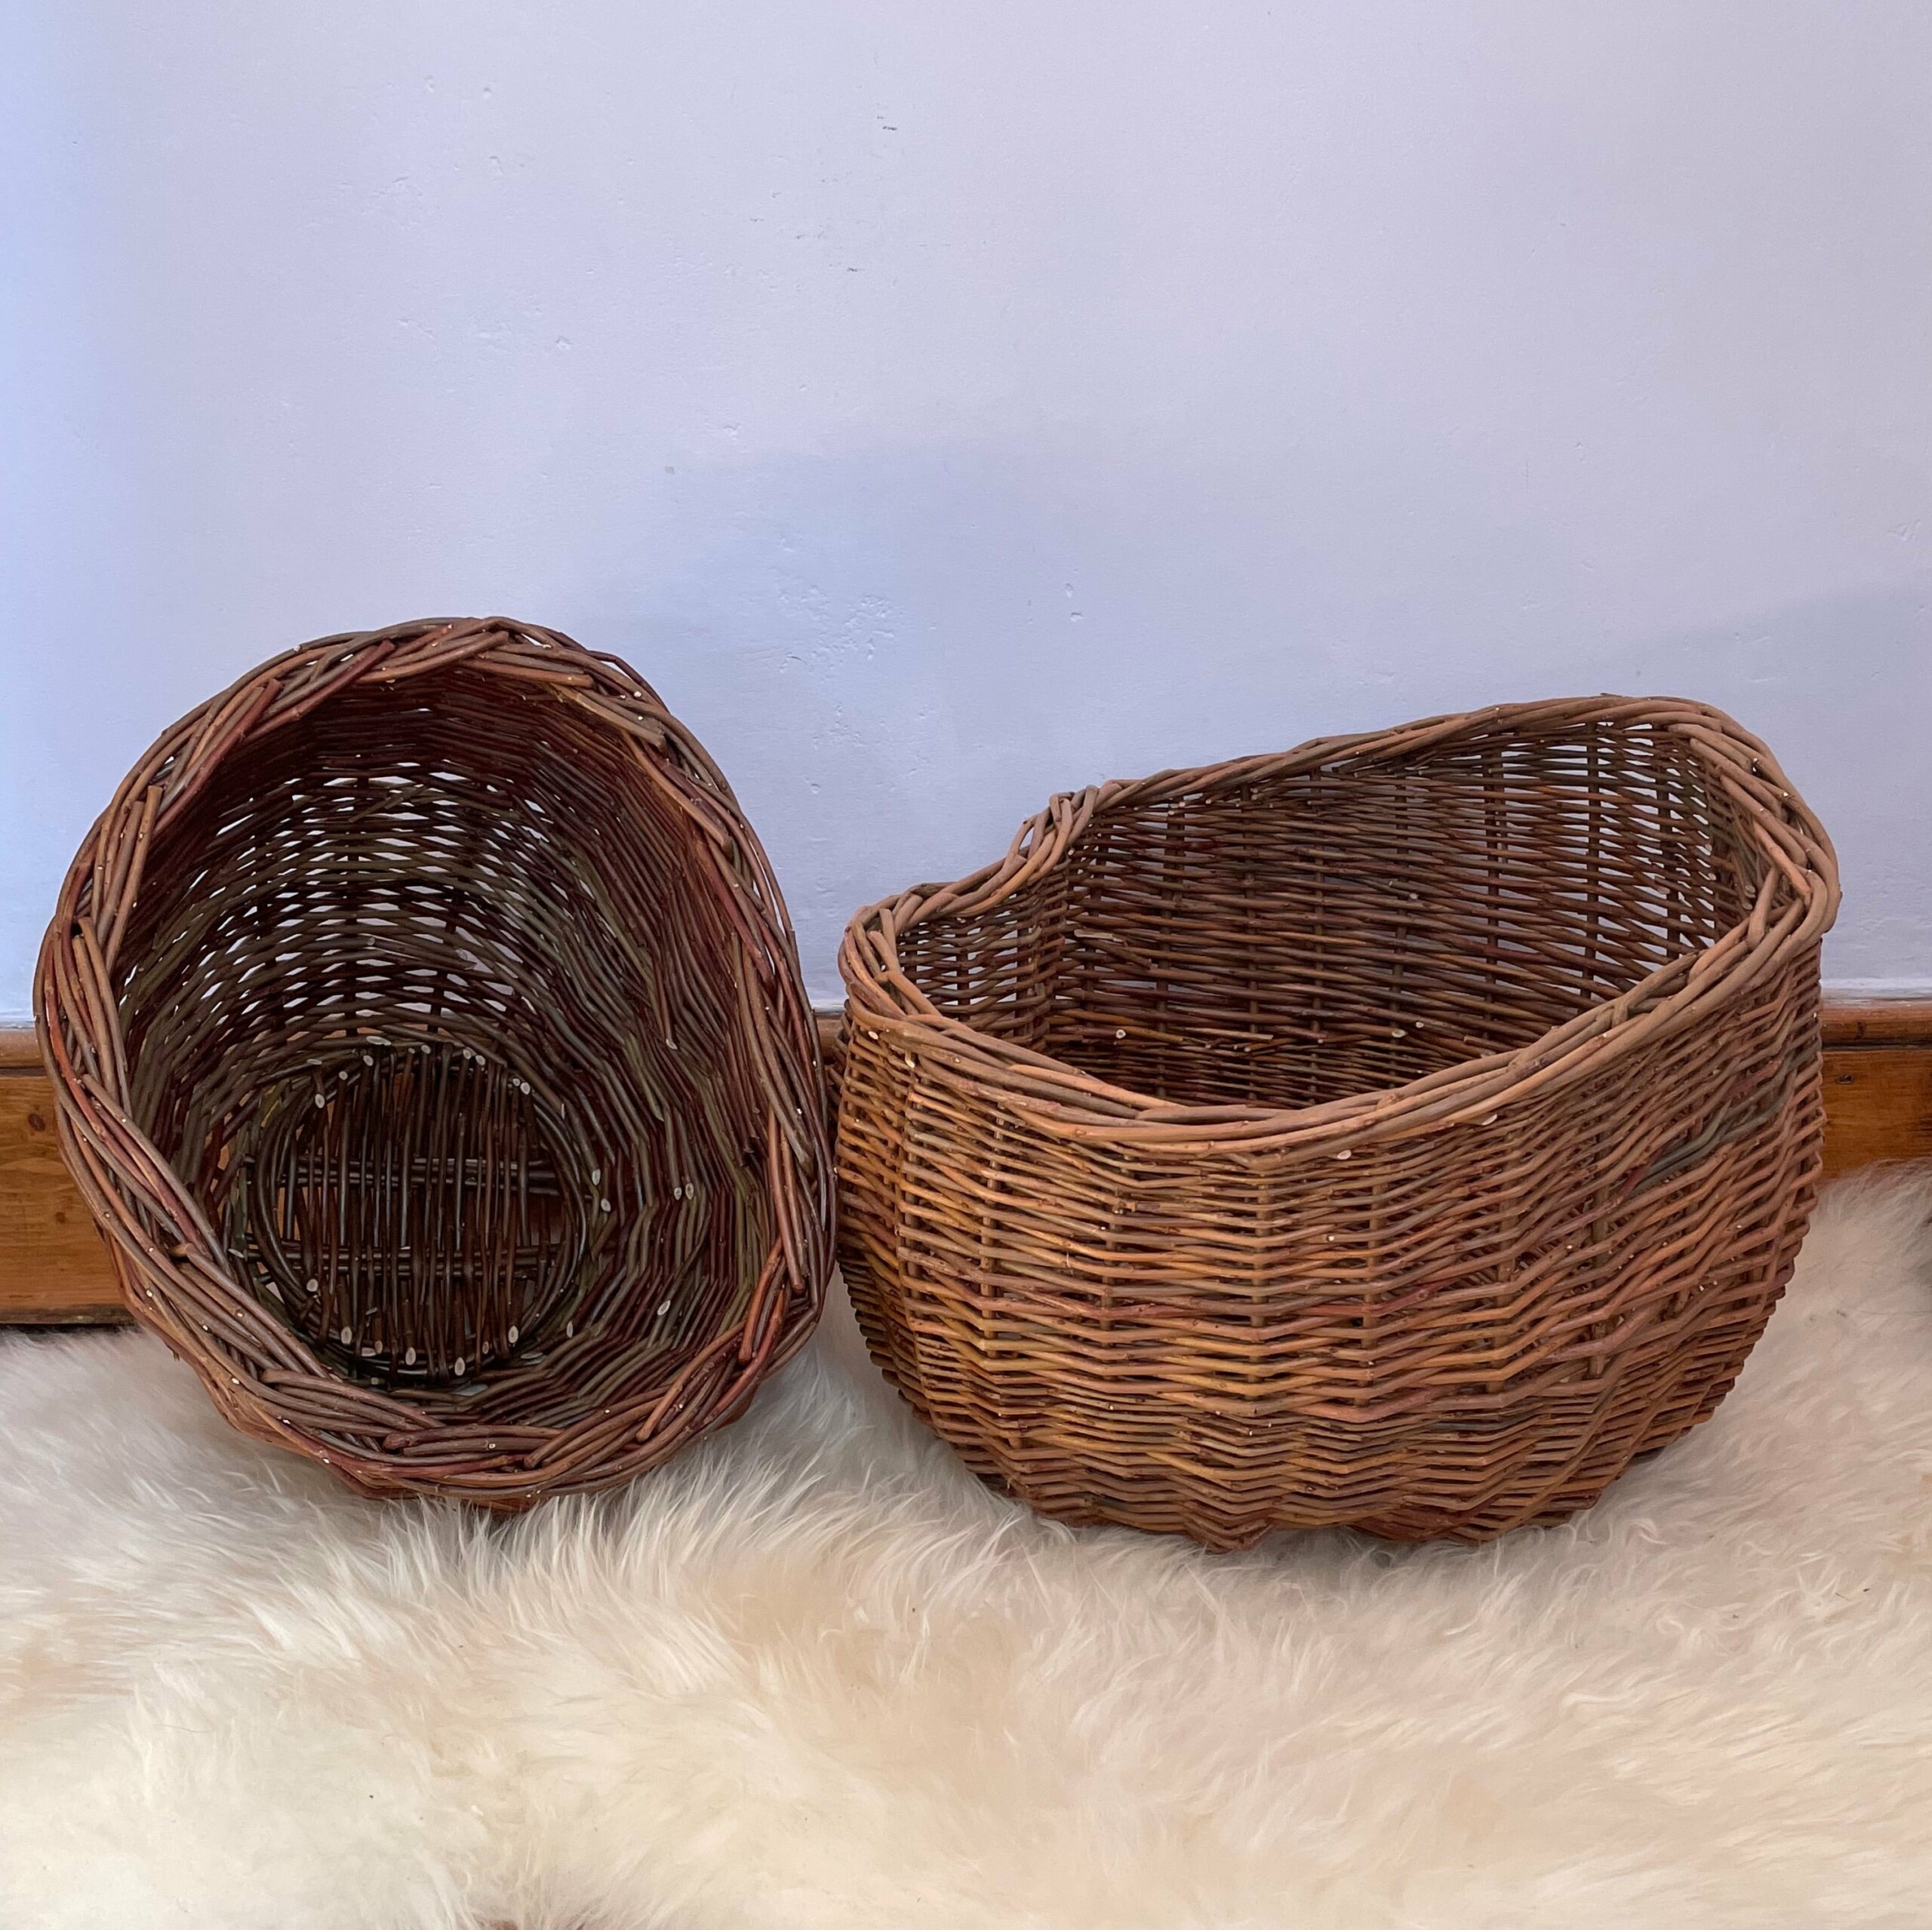 Organic Basket Willow Day Workshop Thursday 23rd May